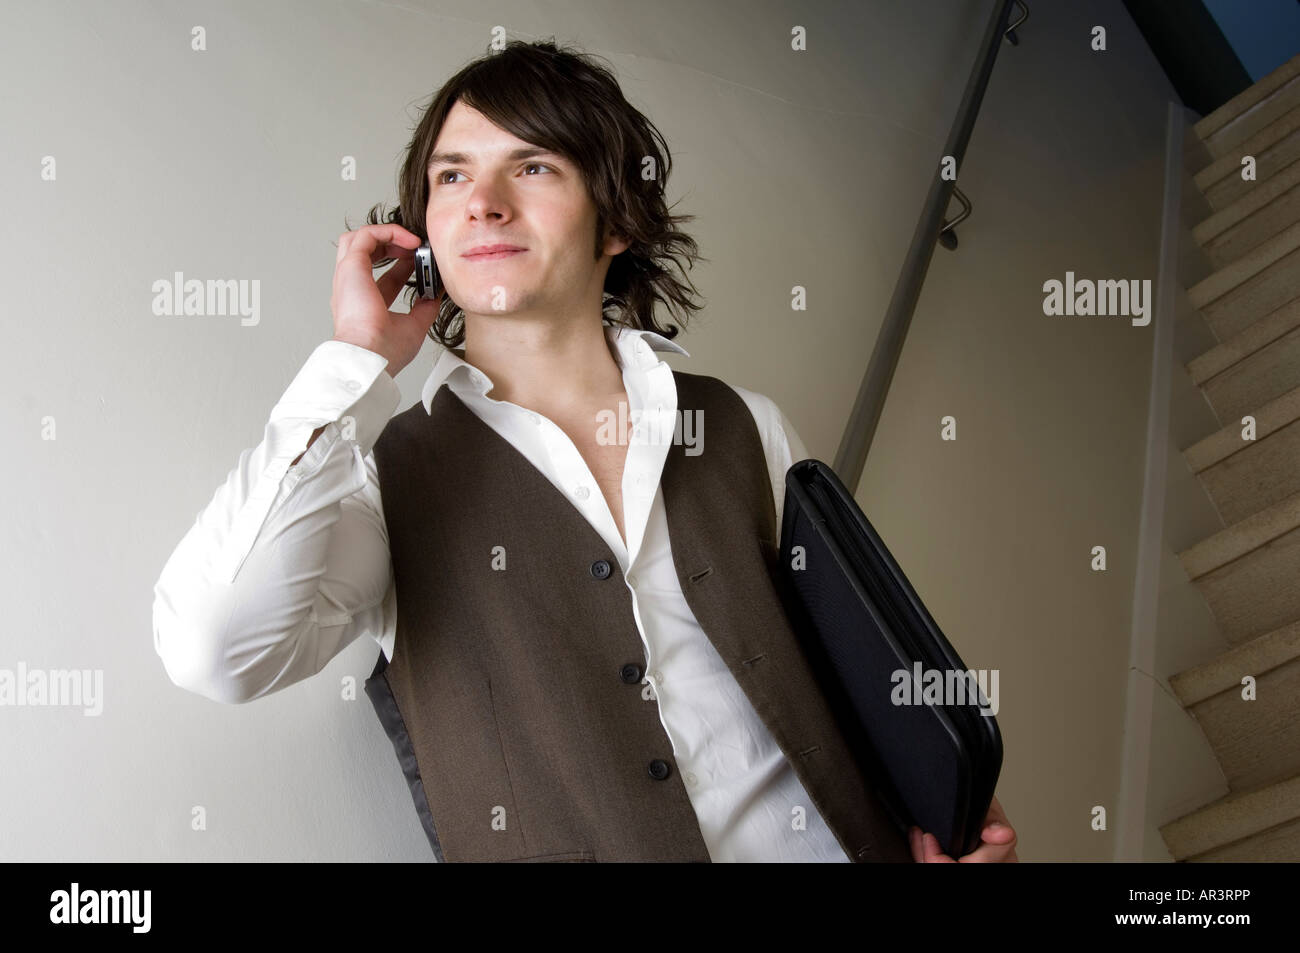 young trendy businessman making a telephone call on stairwell Stock Photo